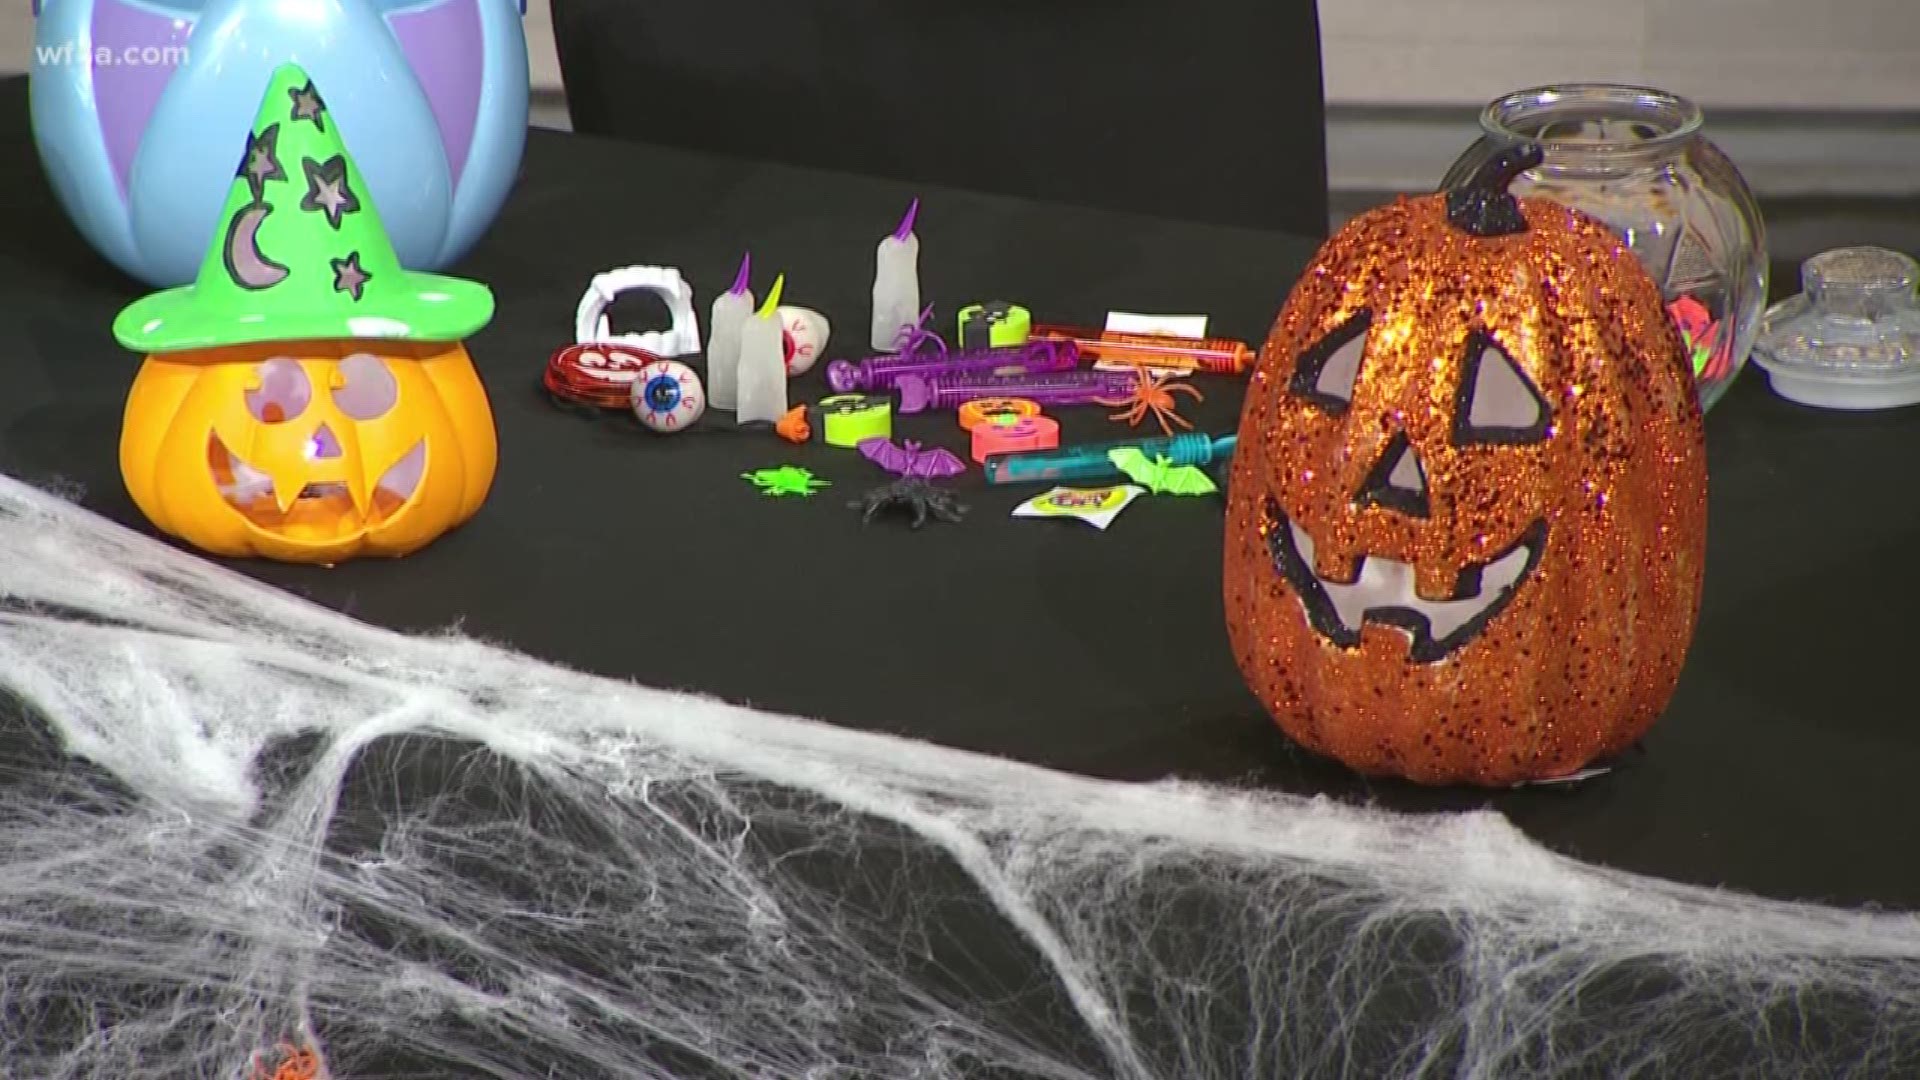 WFAA's Sonia Azad has collected together ideas for different ways you can have a healthier Halloween.